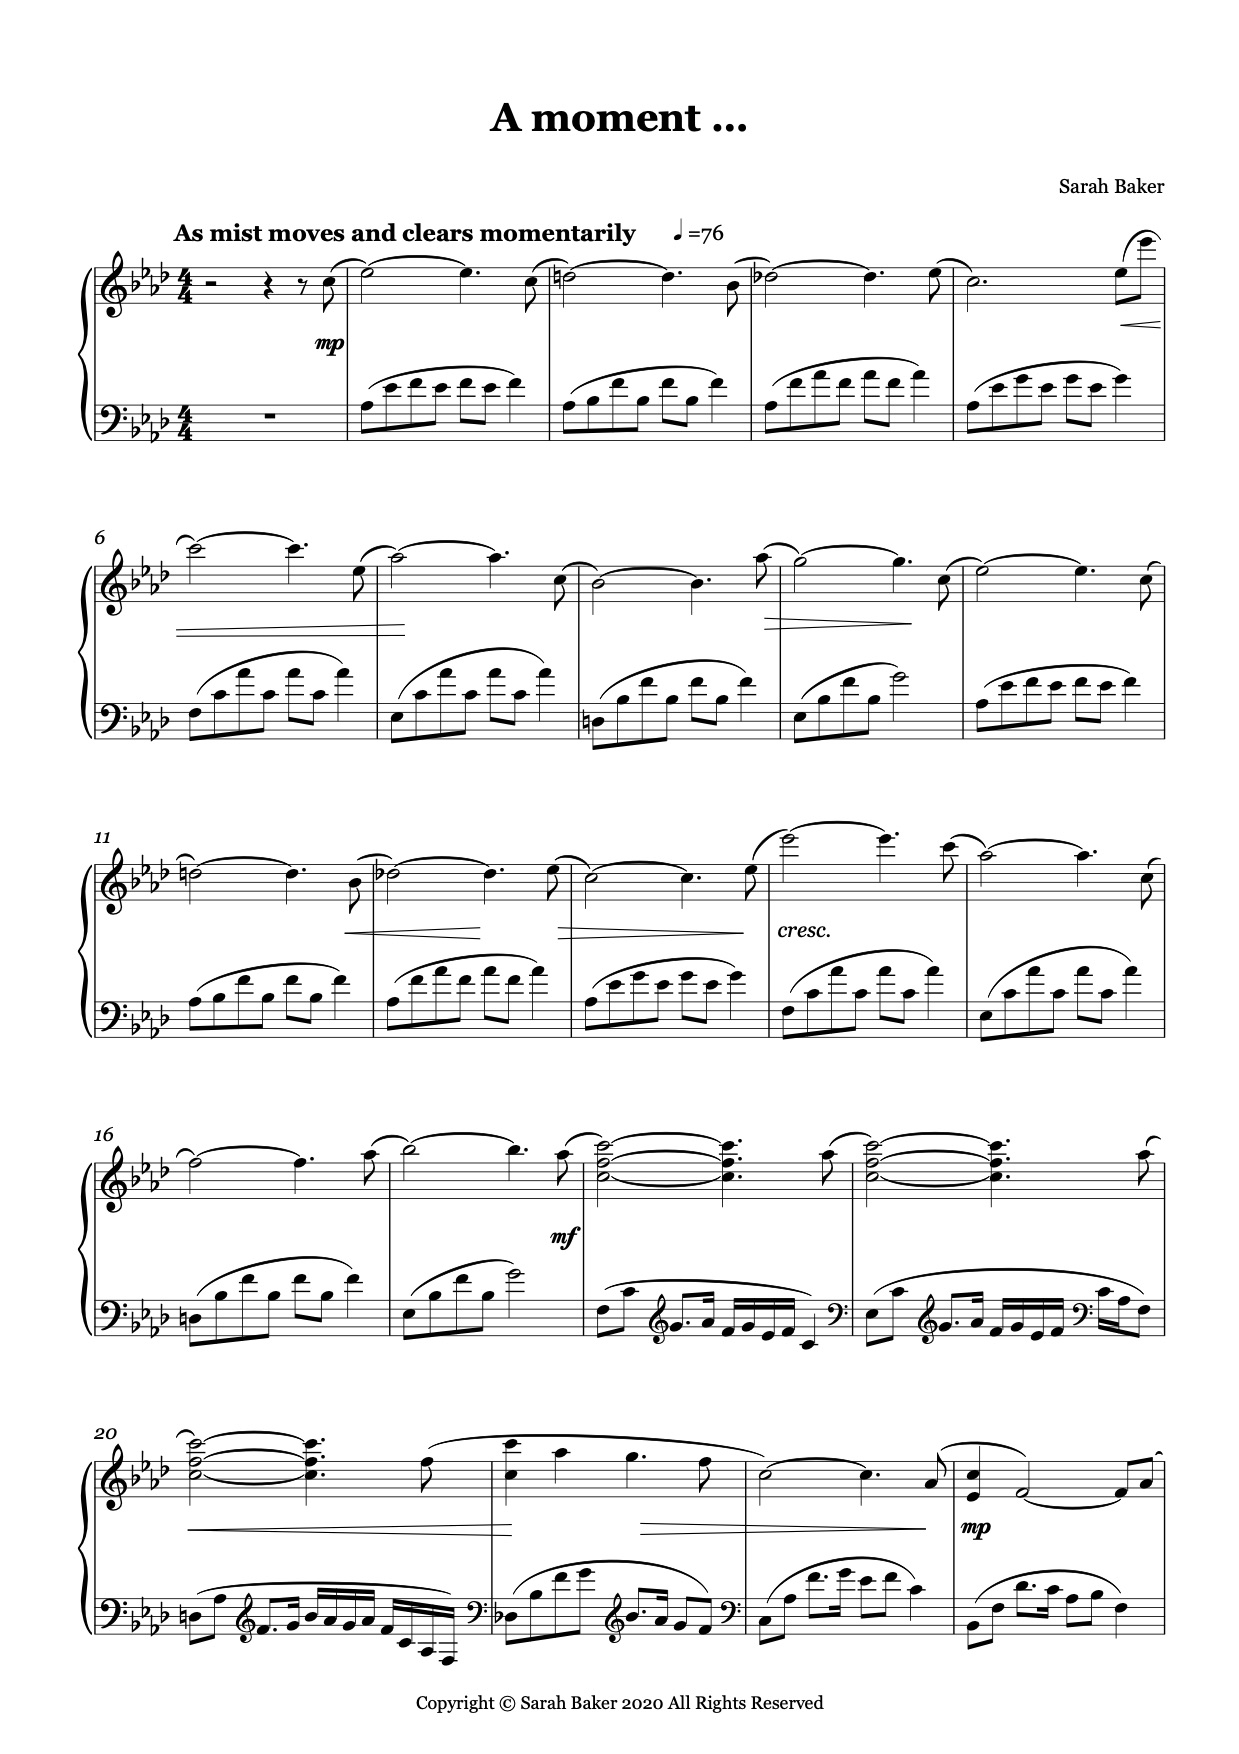 A moment … score example